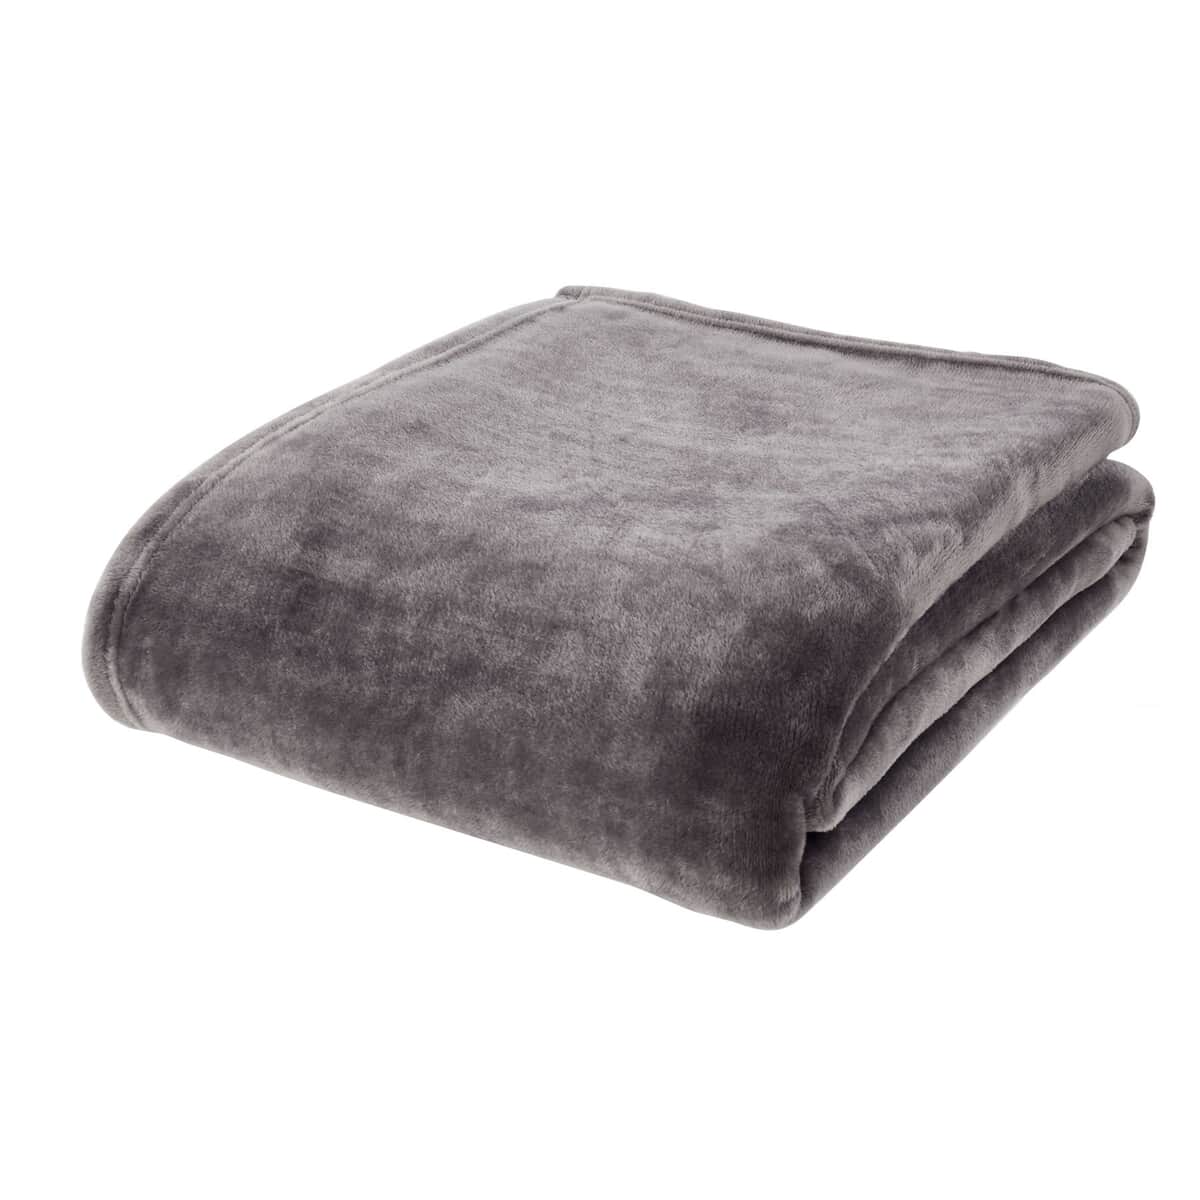 Catherine Lansfield Raschel Velvet Touch Throw Charcoal large